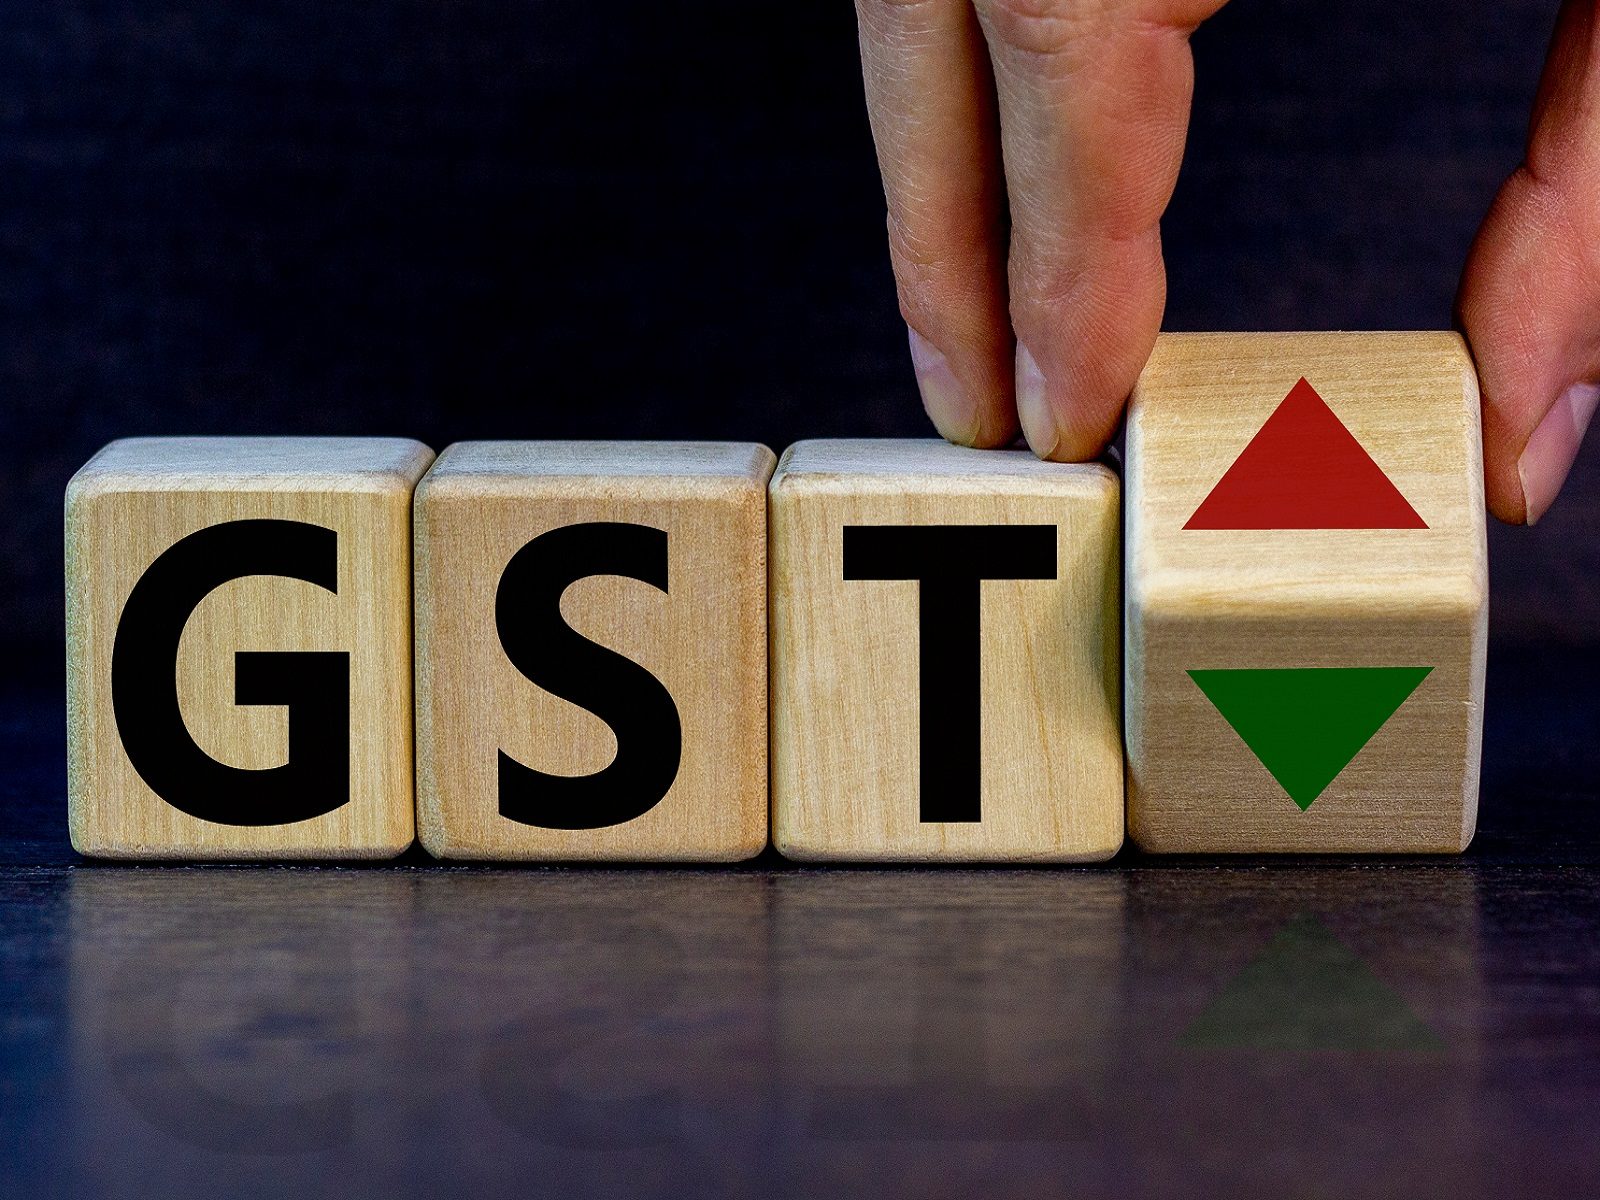 Gst tax Stock Photos, Royalty Free Gst tax Images | Depositphotos